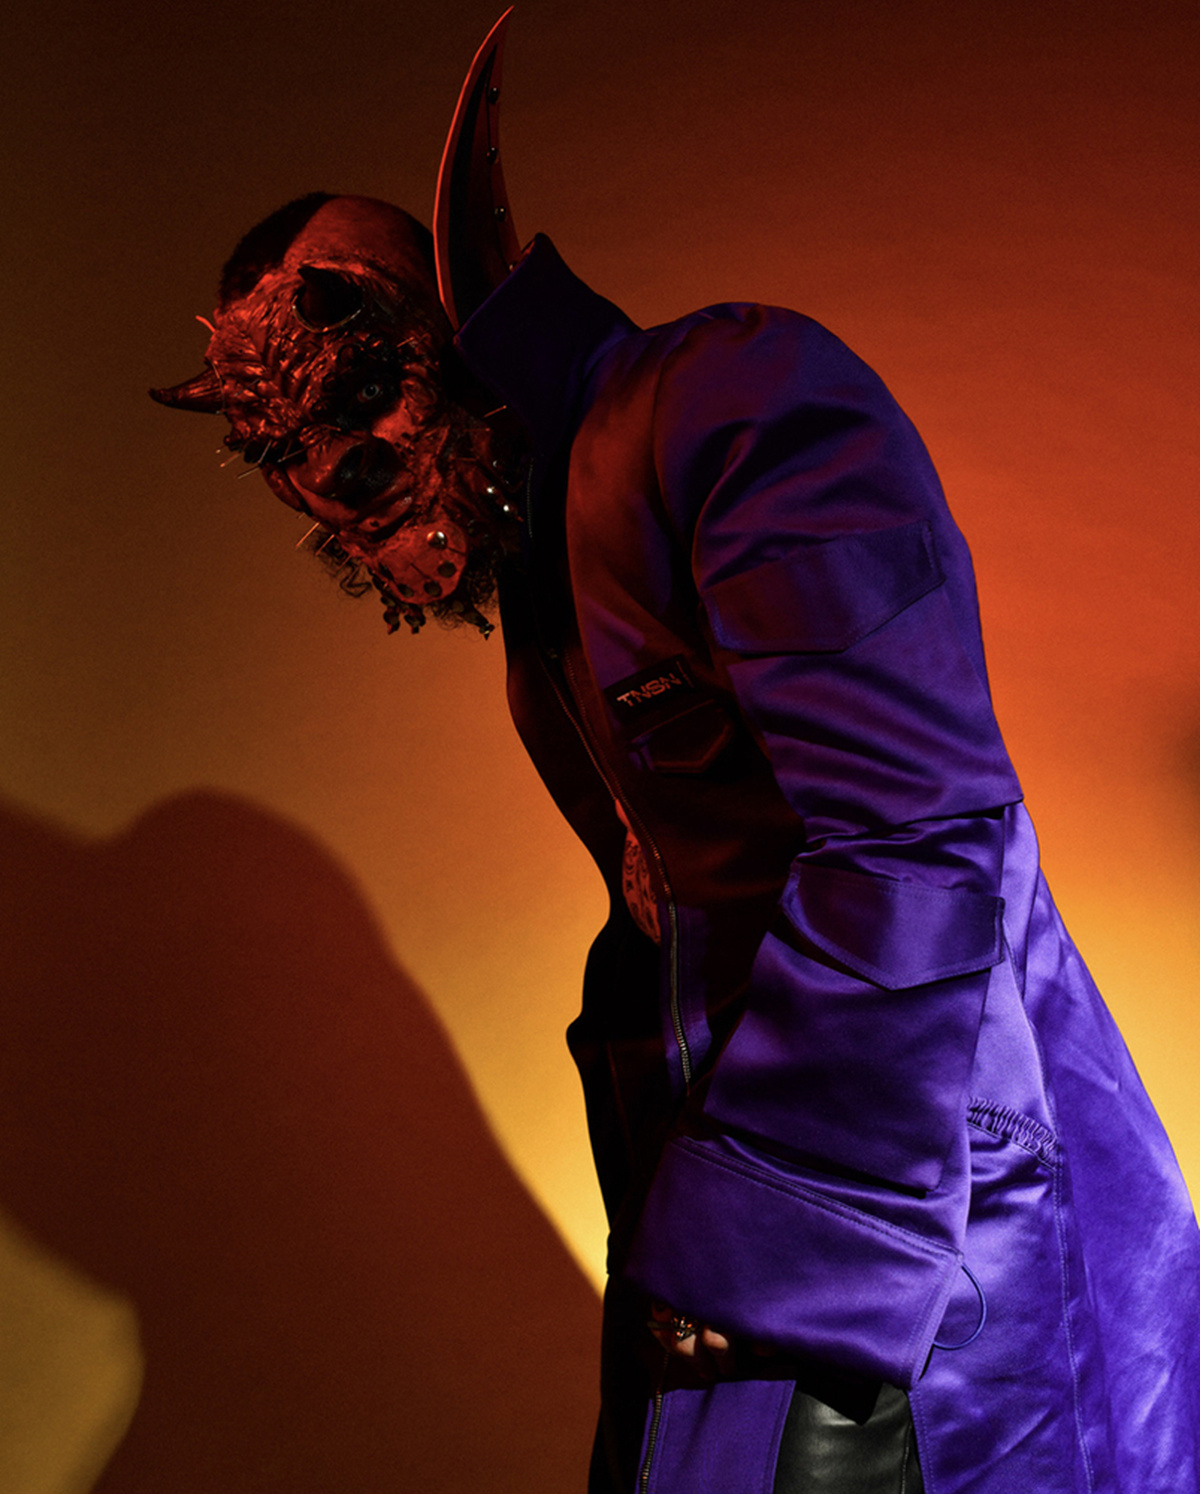 A low angle photo of a man dressed as a devil wearing a long overcoat, lit with dark orange light